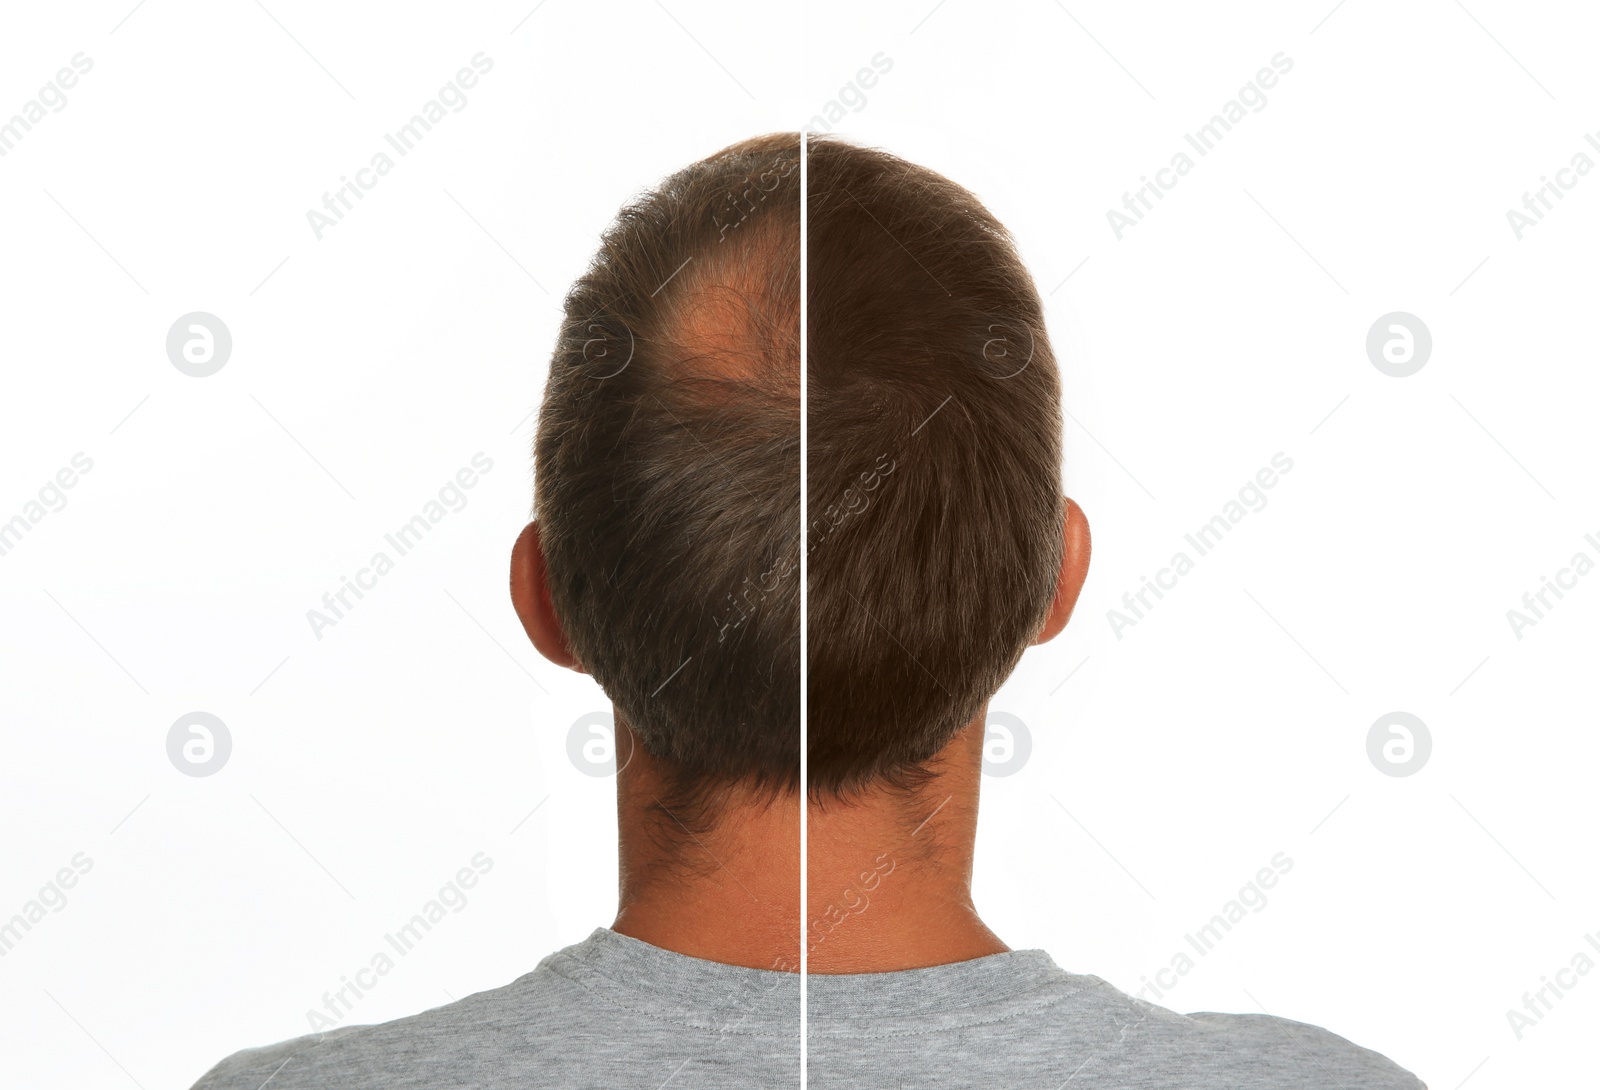 Image of Man with hair loss problem before and after treatment on white background, collage. Visiting trichologist